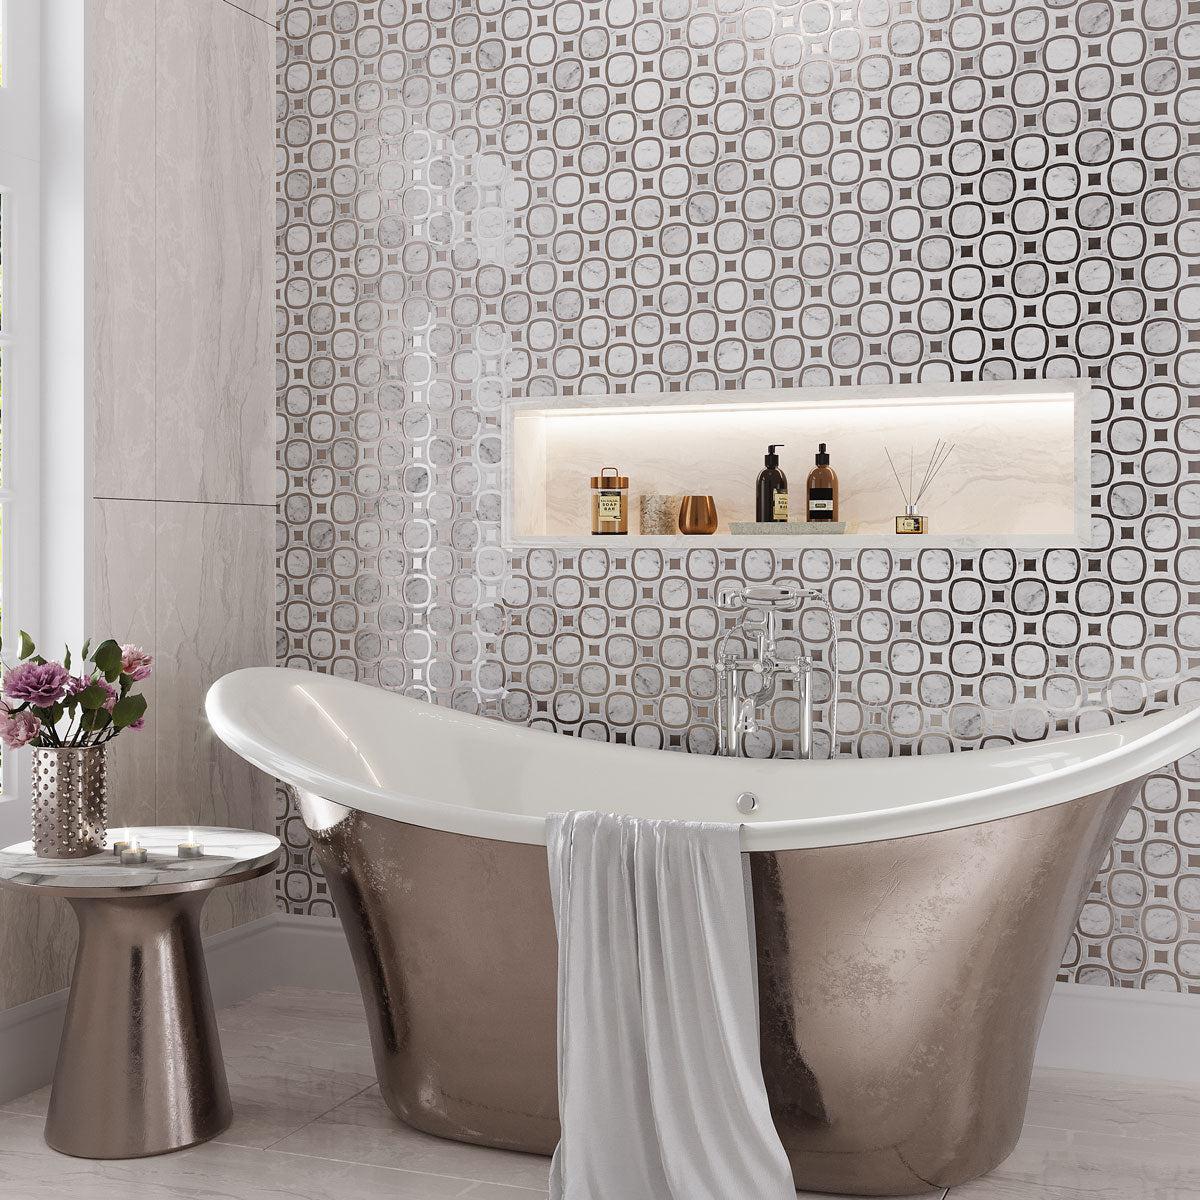 Silver and white bathroom with  glass and marble geometric tiles and a free standing tub